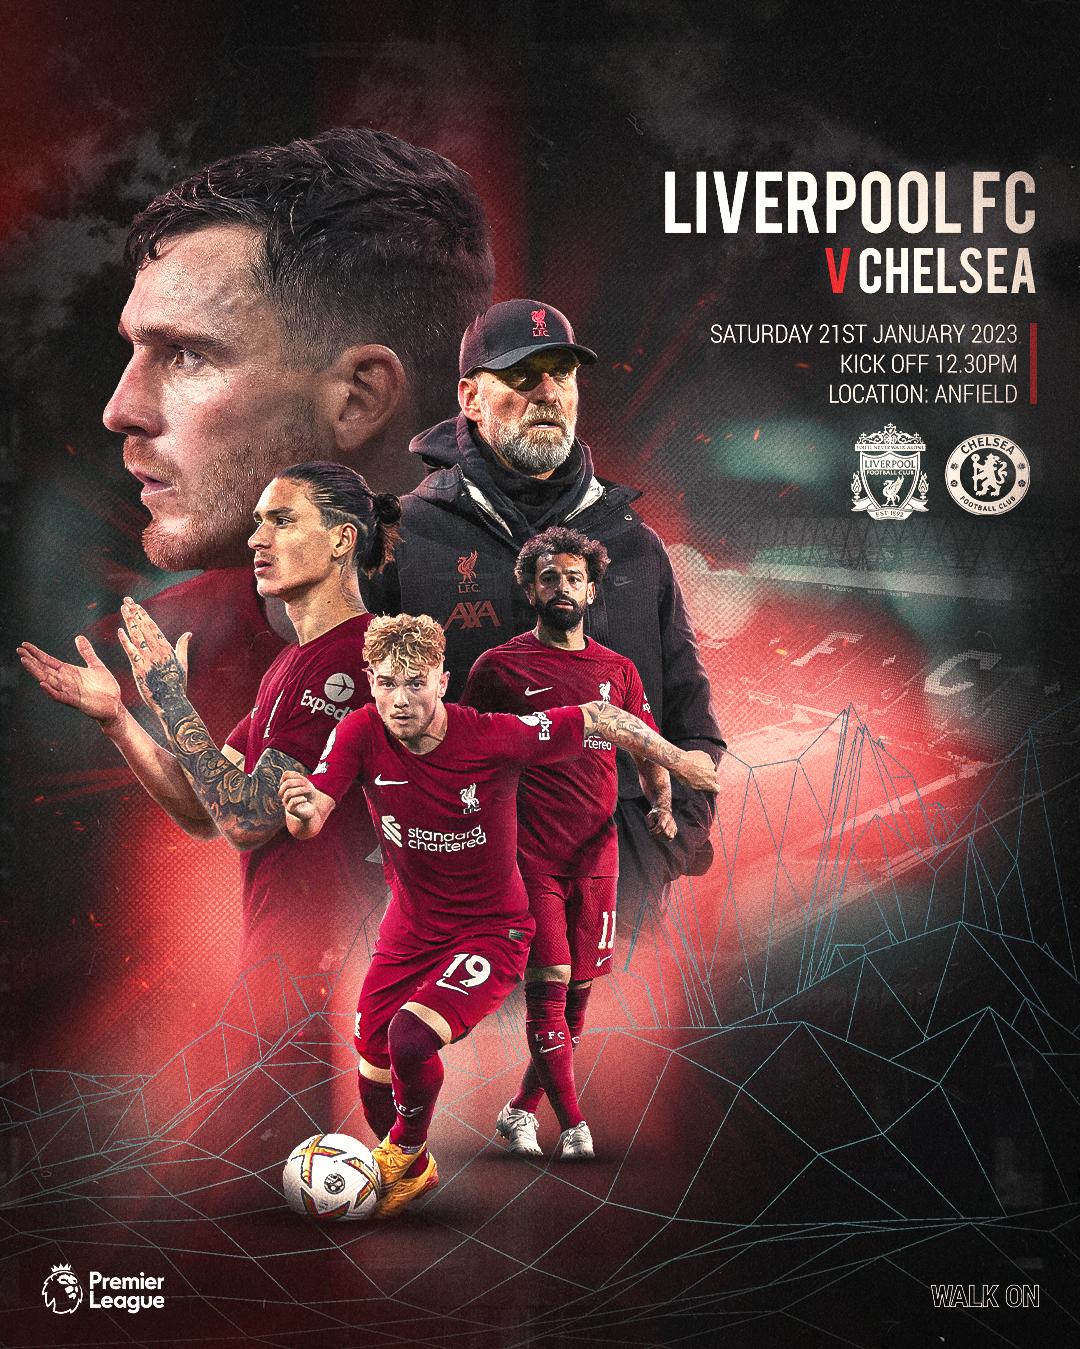 Liverpool FC on Back in premierleague action at Anfield